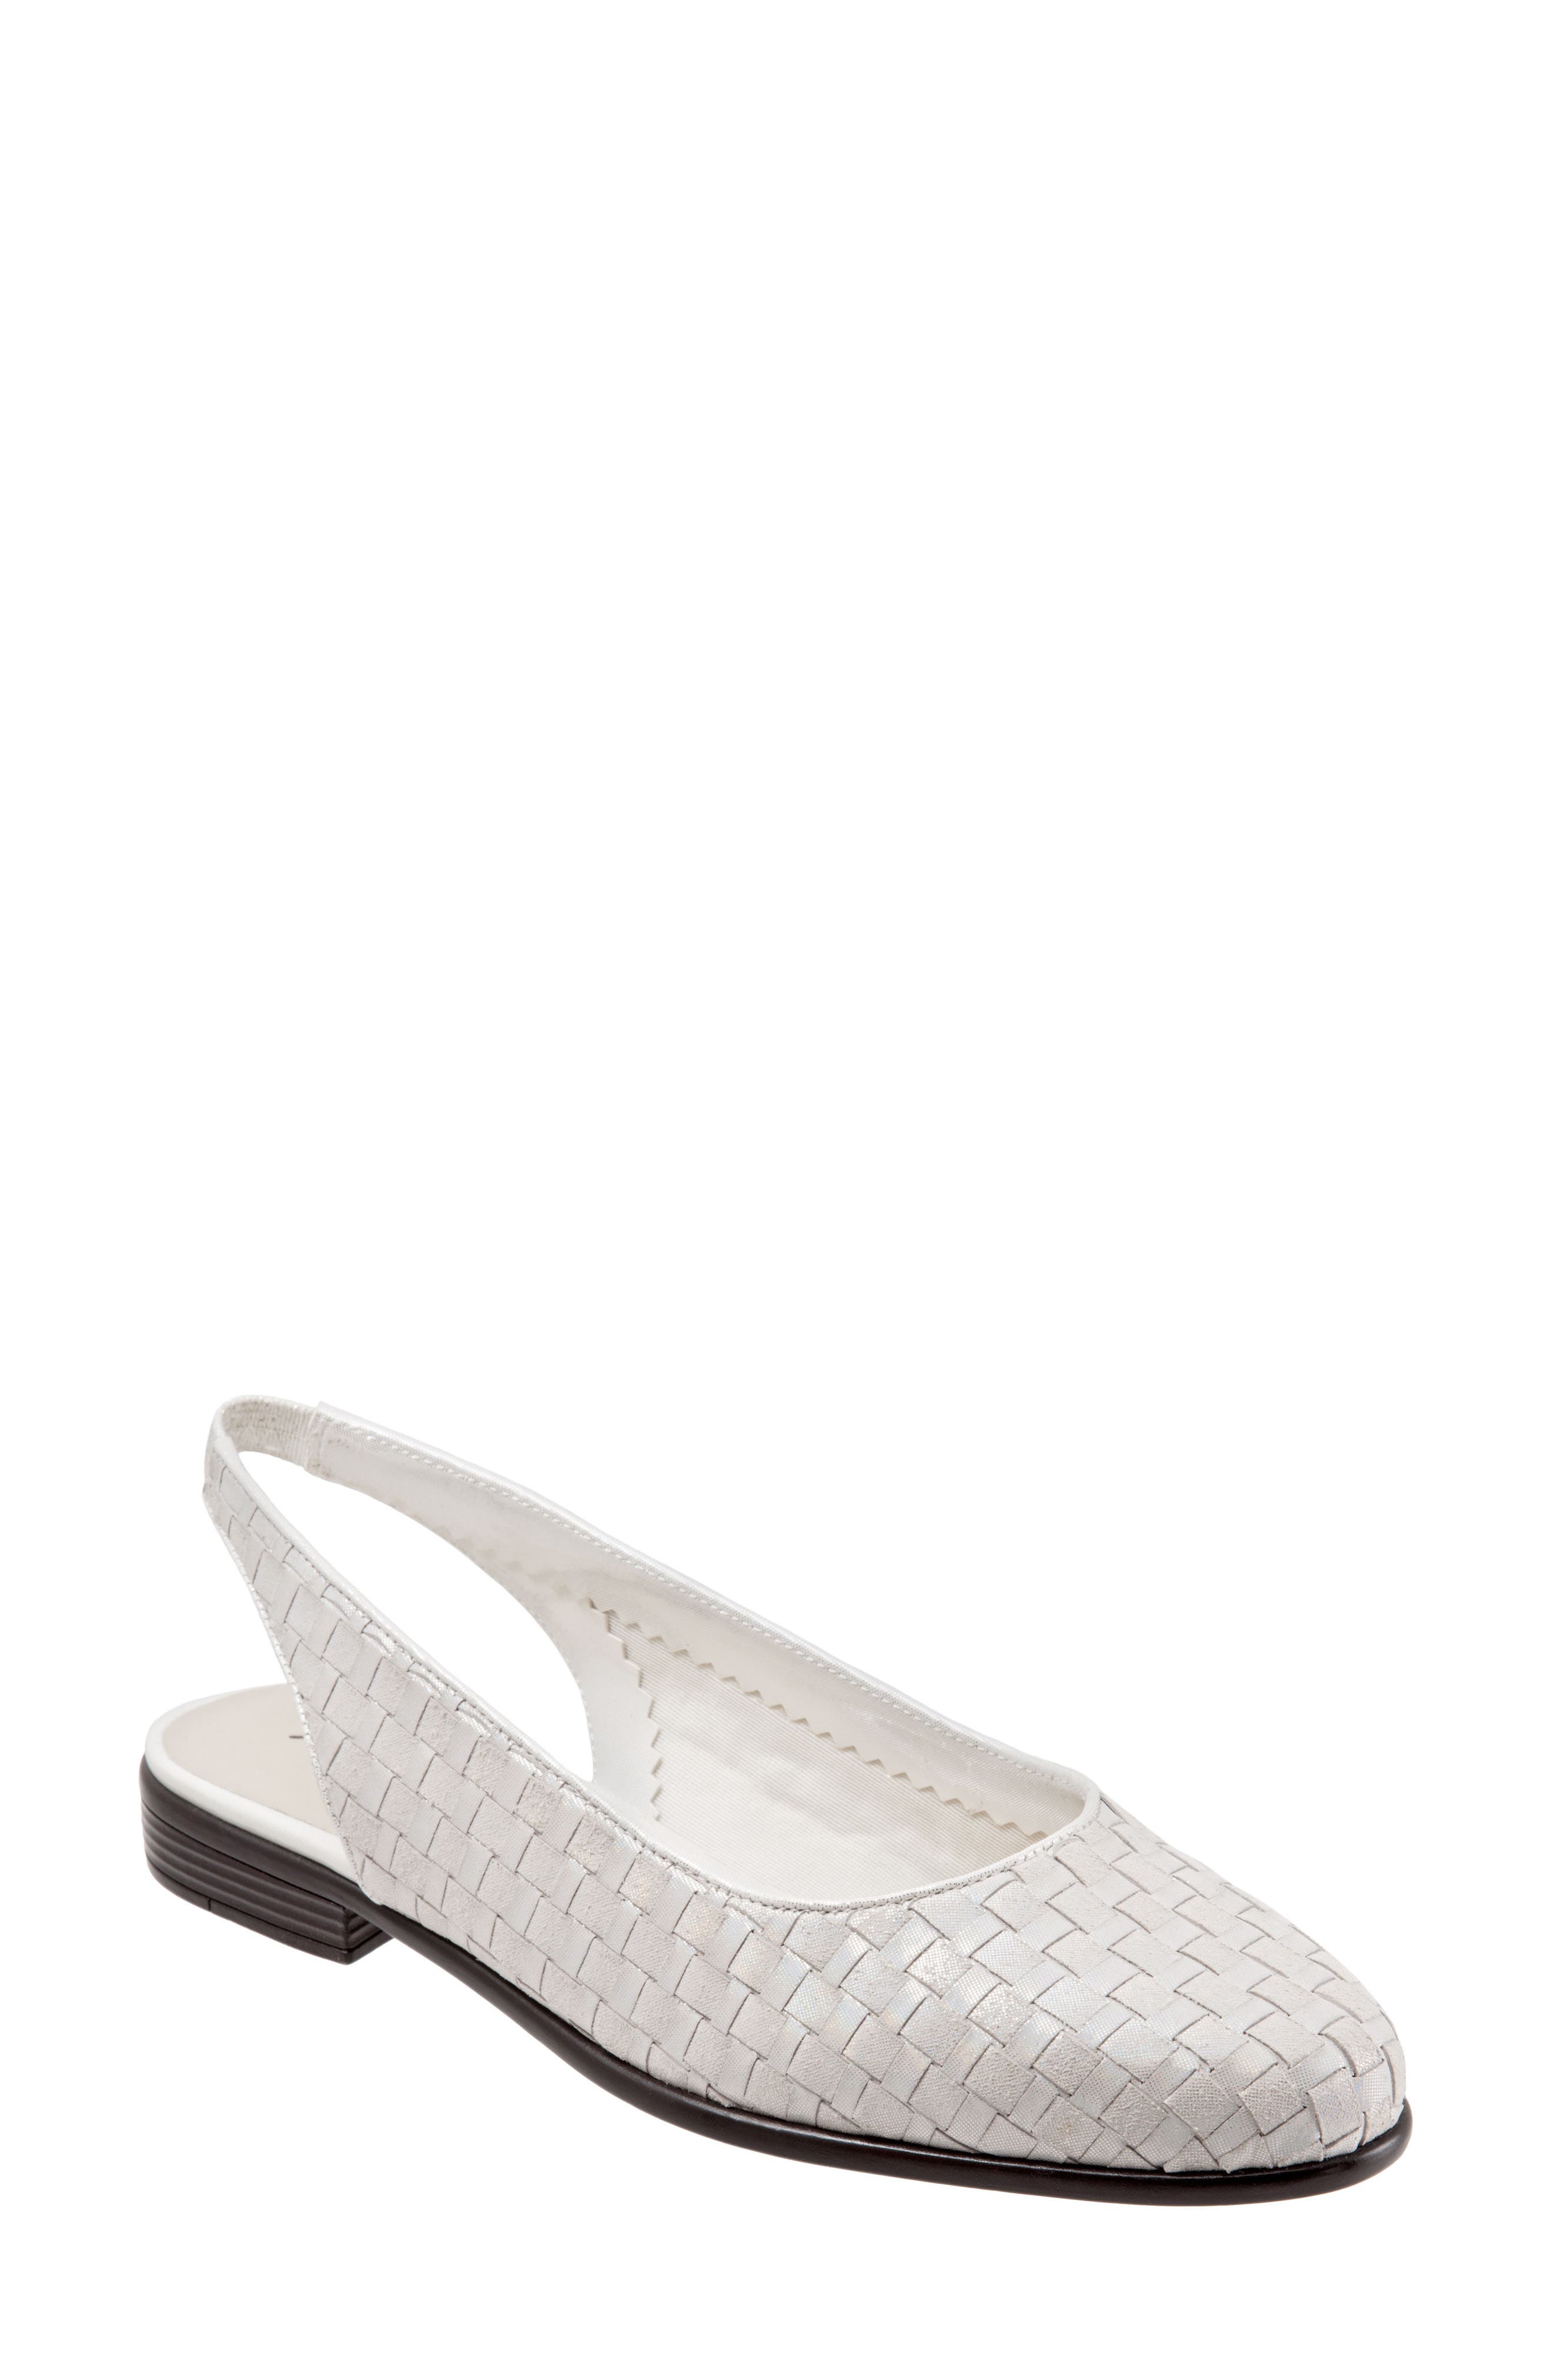 Trotters | Lucy Slingback Flat 